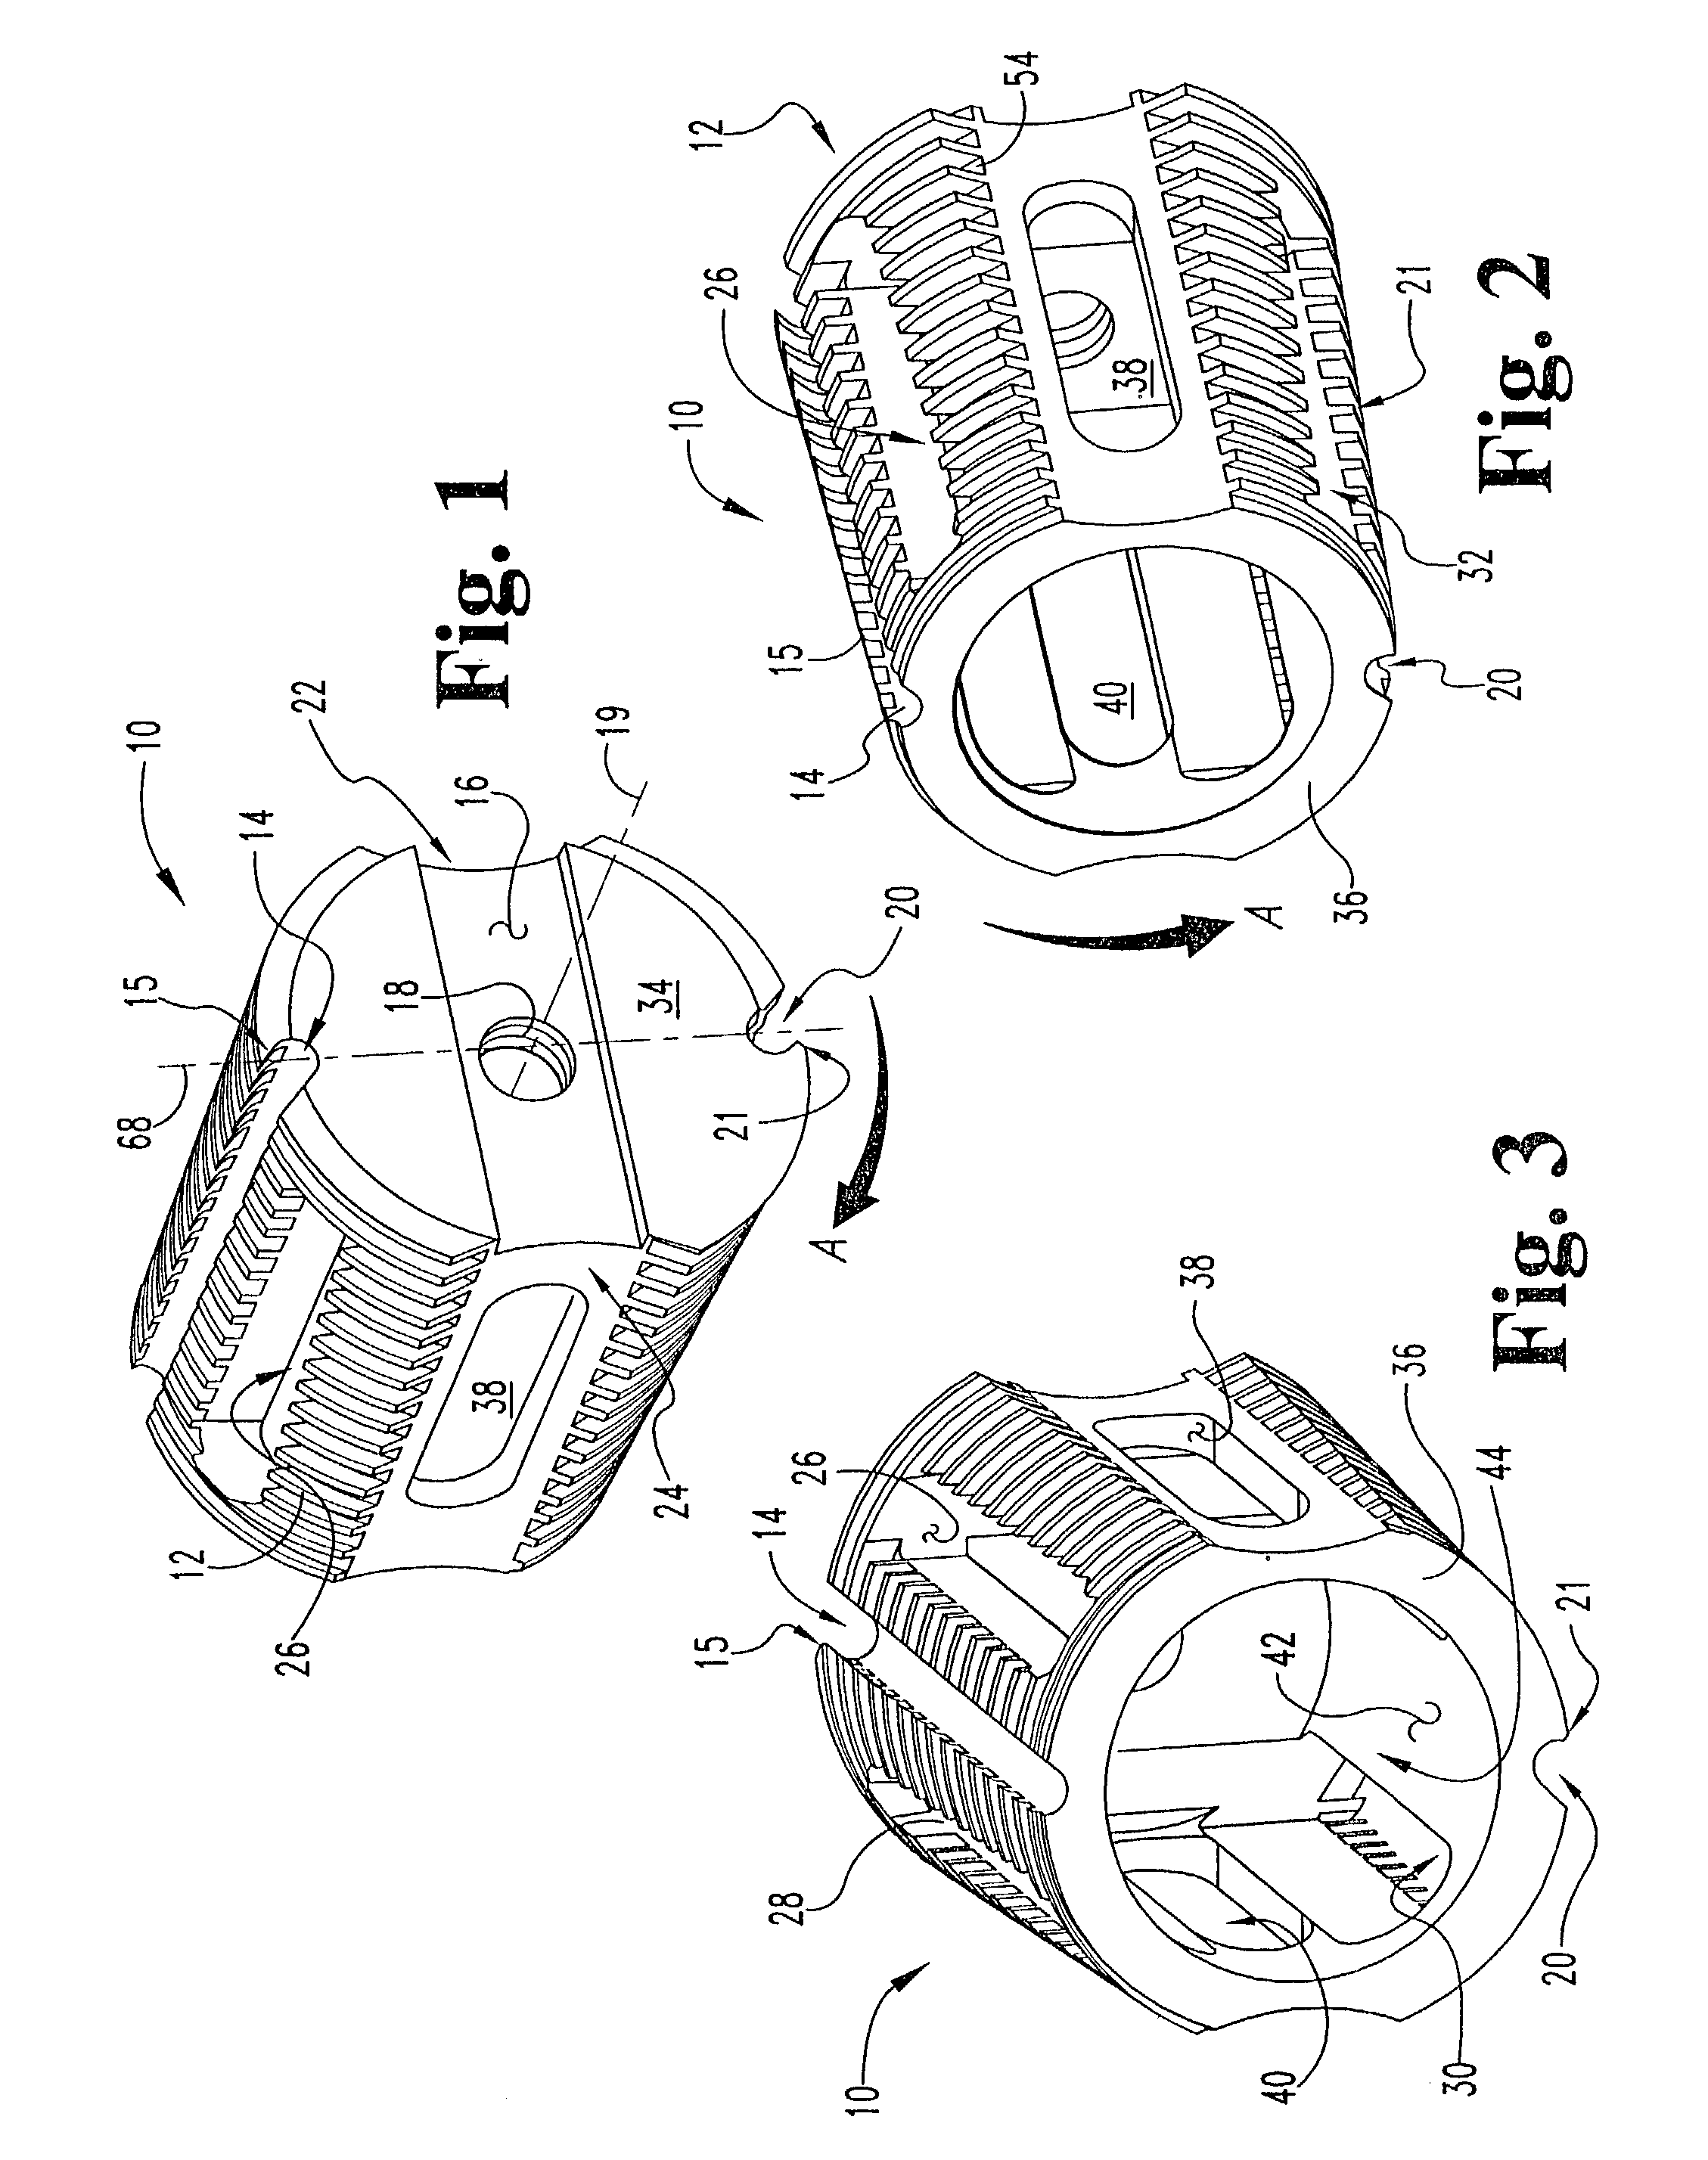 Interbody fusion device with anti-rotation features